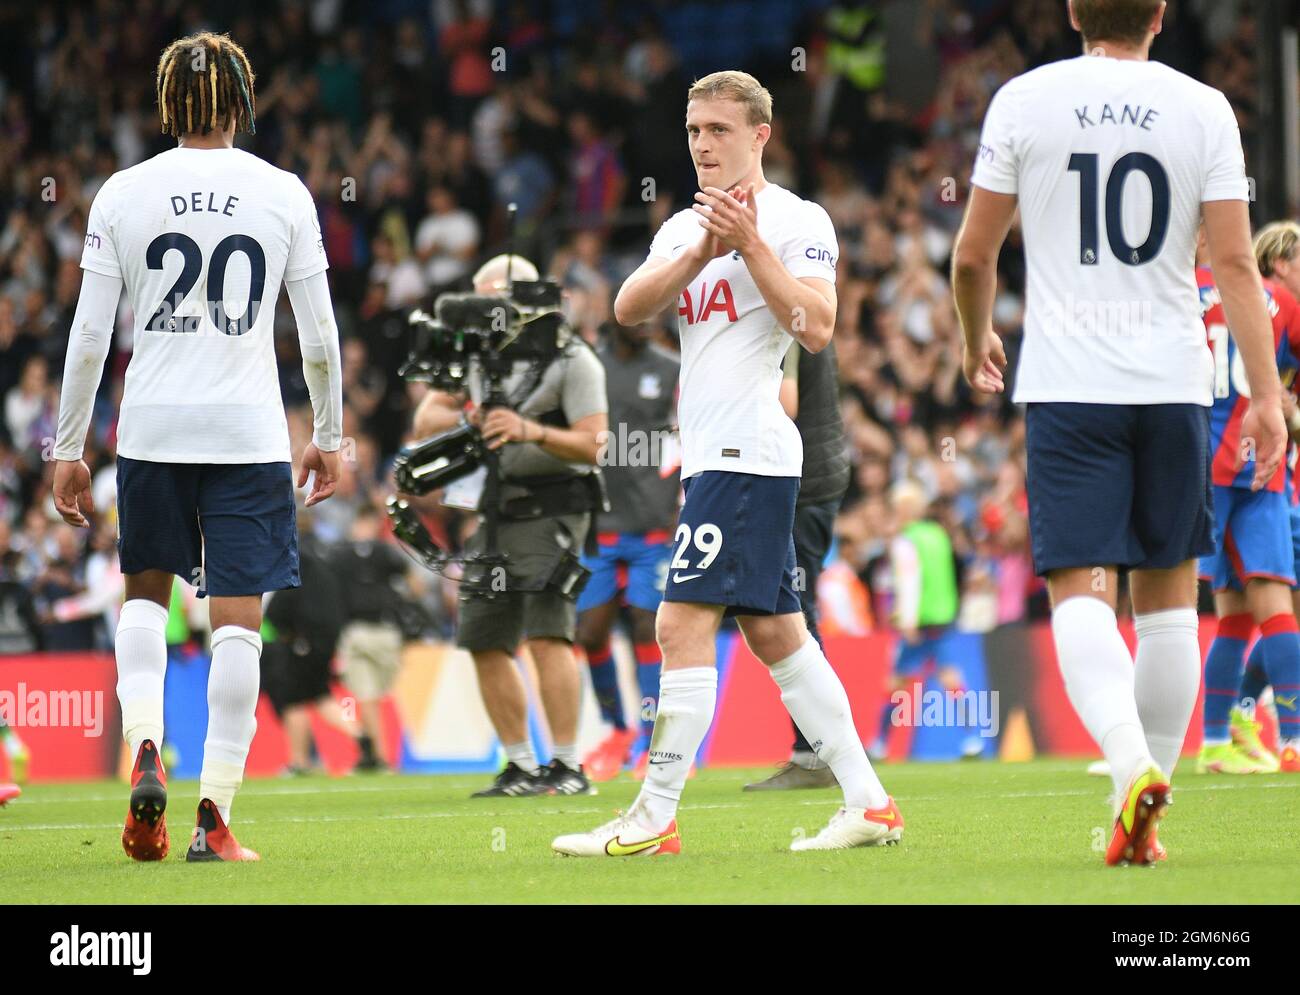 LONDON, ENGLAND - SEPTEMBER 11, 2021: Oliver William Skipp of Tottenham salute the fans after the 2021/22 Premier League matchweek 4 game between Crystal Palace FC and Tottenham Hotspur FC at Selhurst Park. Copyright: Cosmin Iftode/Picstaff Stock Photo